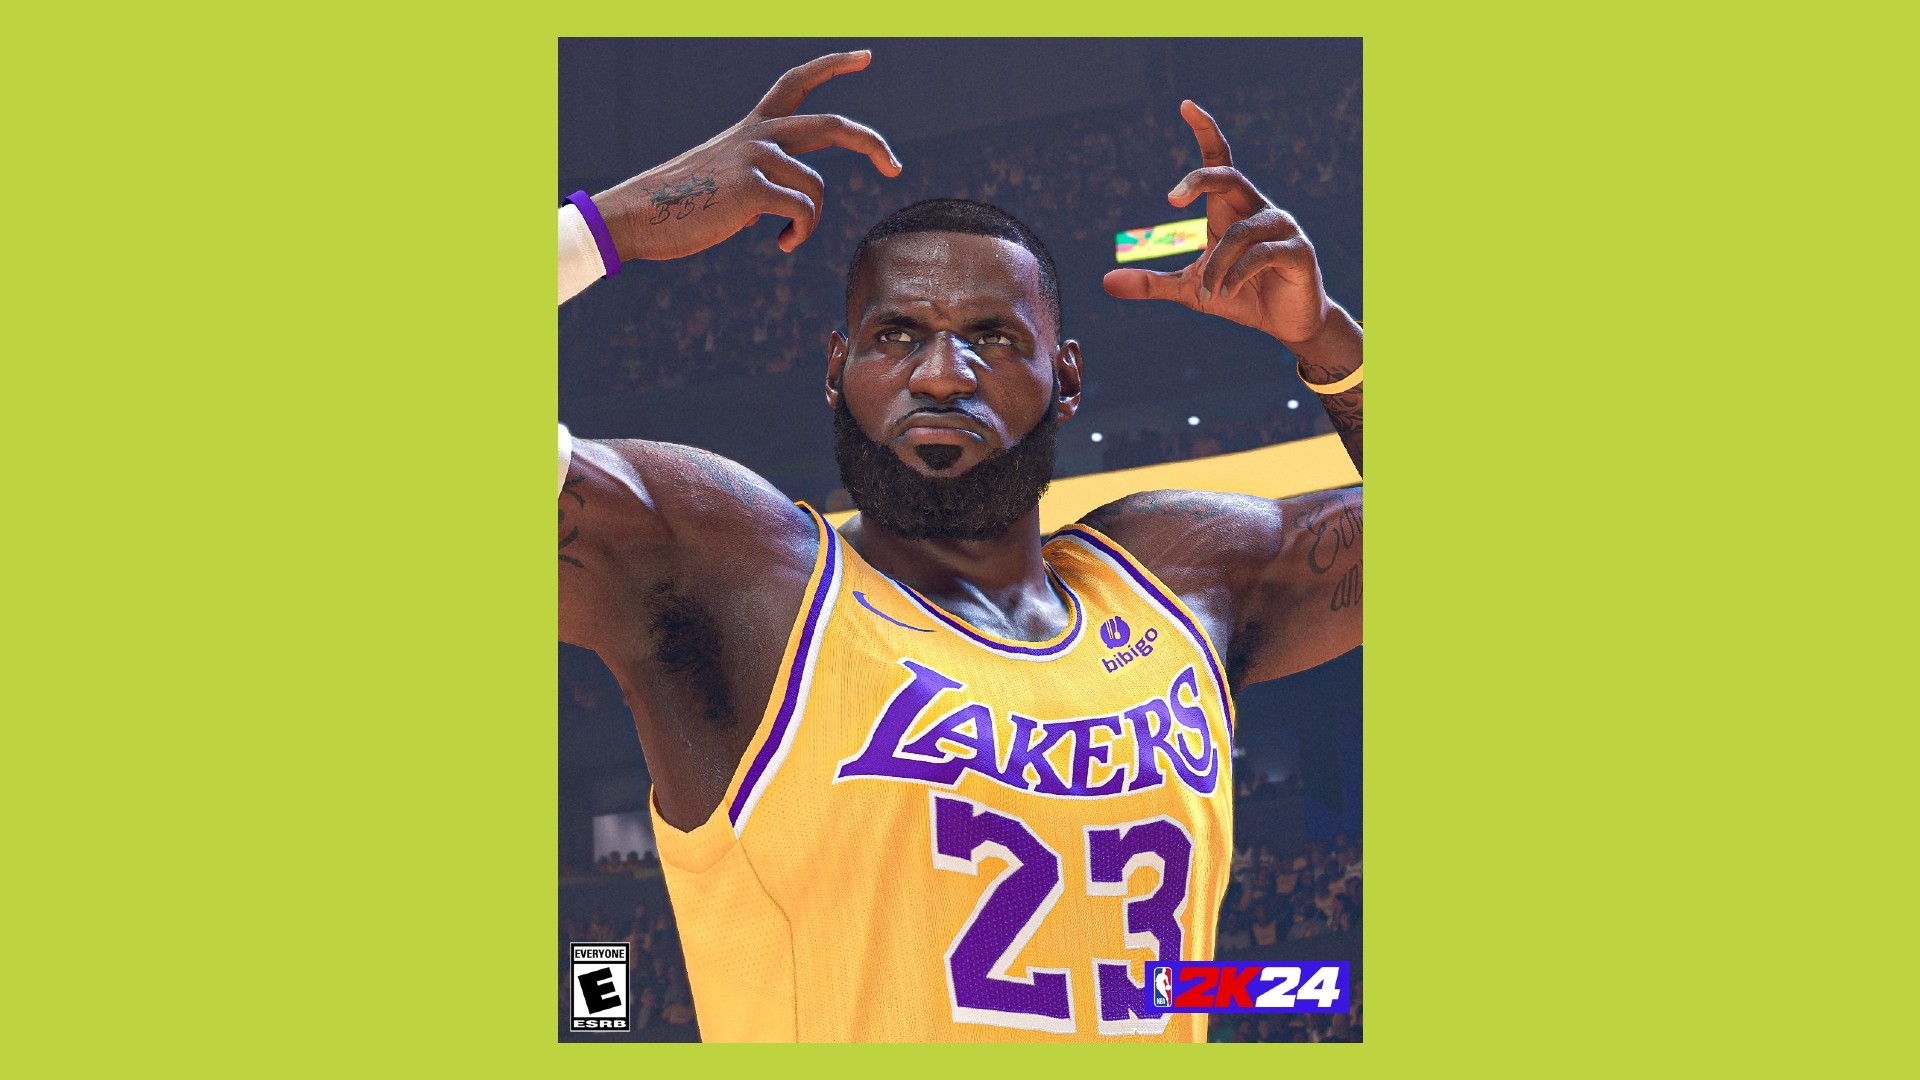 LeBron James in 'NBA 2K' through the years: From his debut in NBA